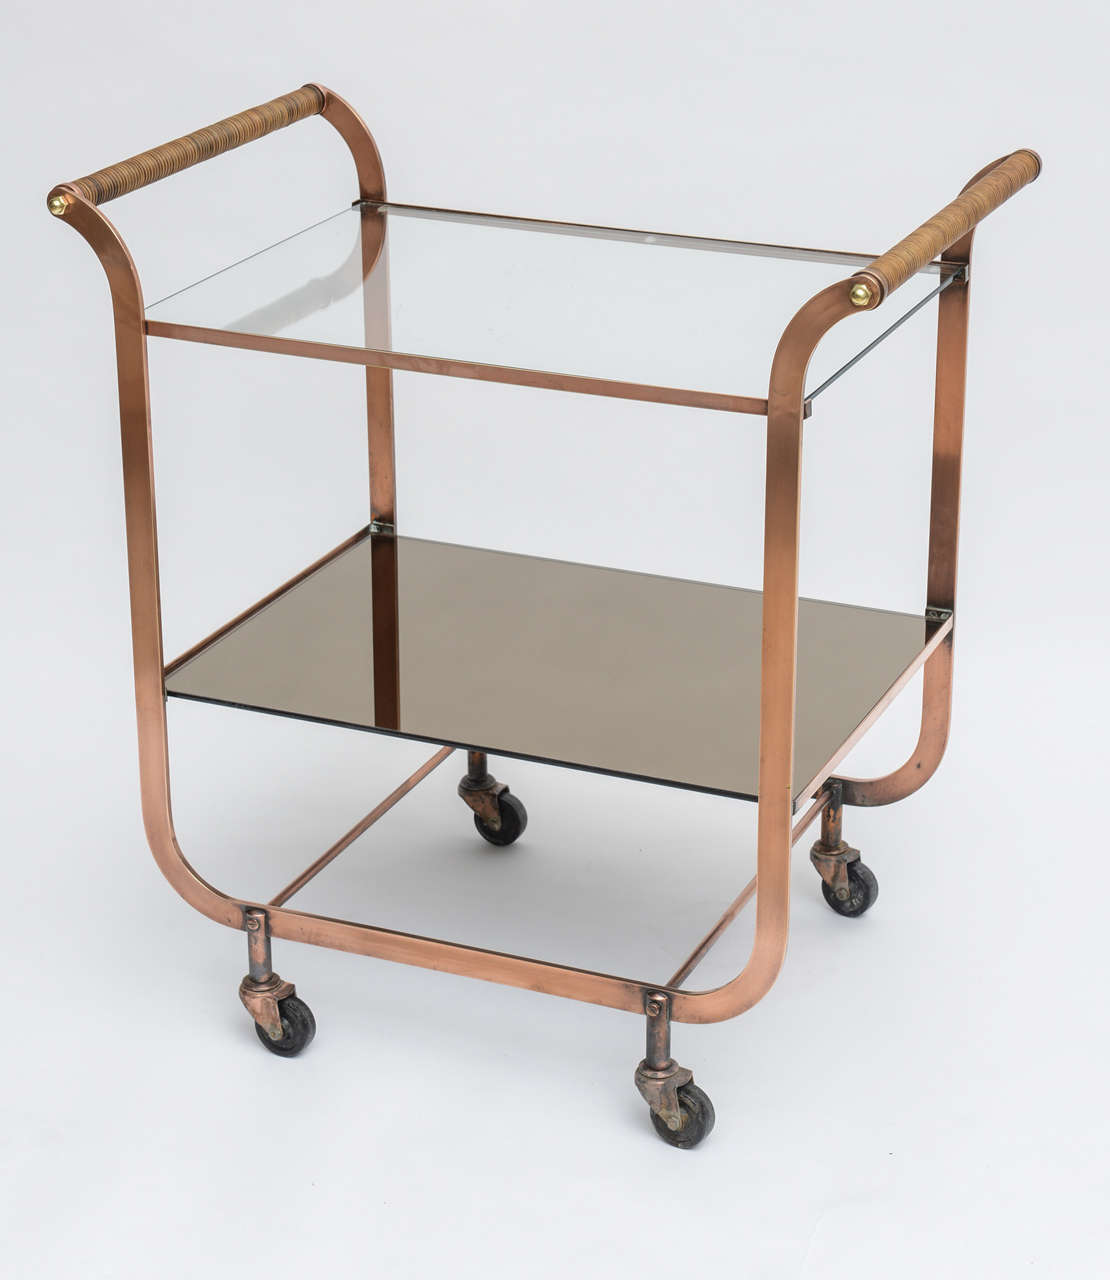 Unusual and handsome Deco-style copper bar cart with rattan-wrapped handles and brass detailing. Top shelf is clear glass, bottom shelf is bronzed mirror. Original wheels are in good condition, and the cart rolls easily.